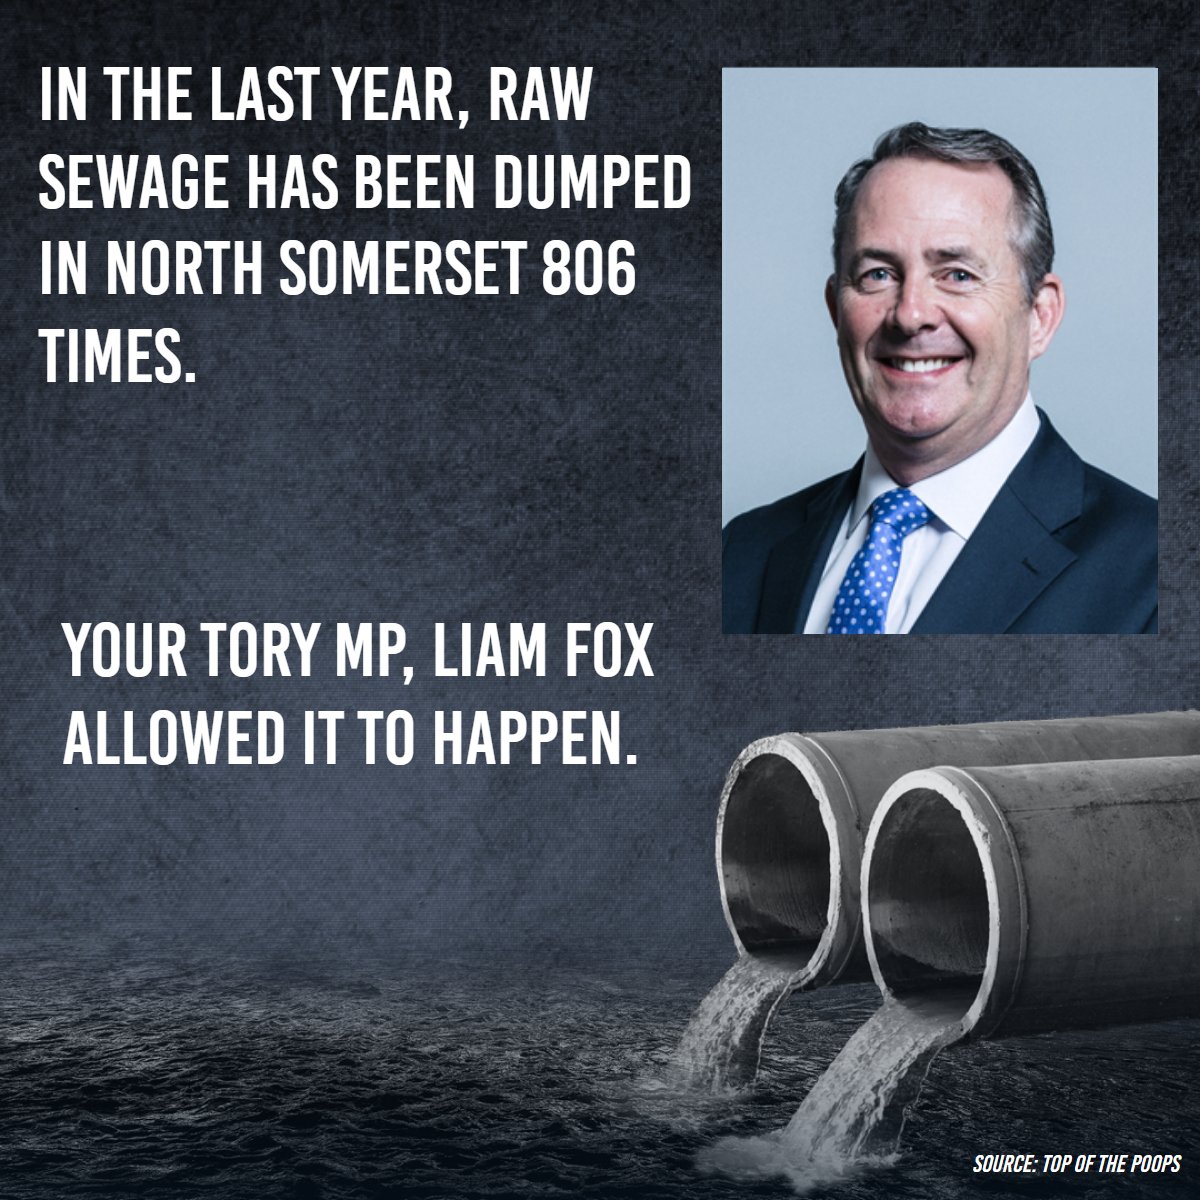 Sewage dumping is the highest since records began, and water borne diseases are up by 60% since 2010.

This is outrageous and dangerous, and water bosses are still getting millions in bonuses.

Liam Fox along with 292 Tory MPs voted to allow this.
#SewageScandal #NorthSomerset